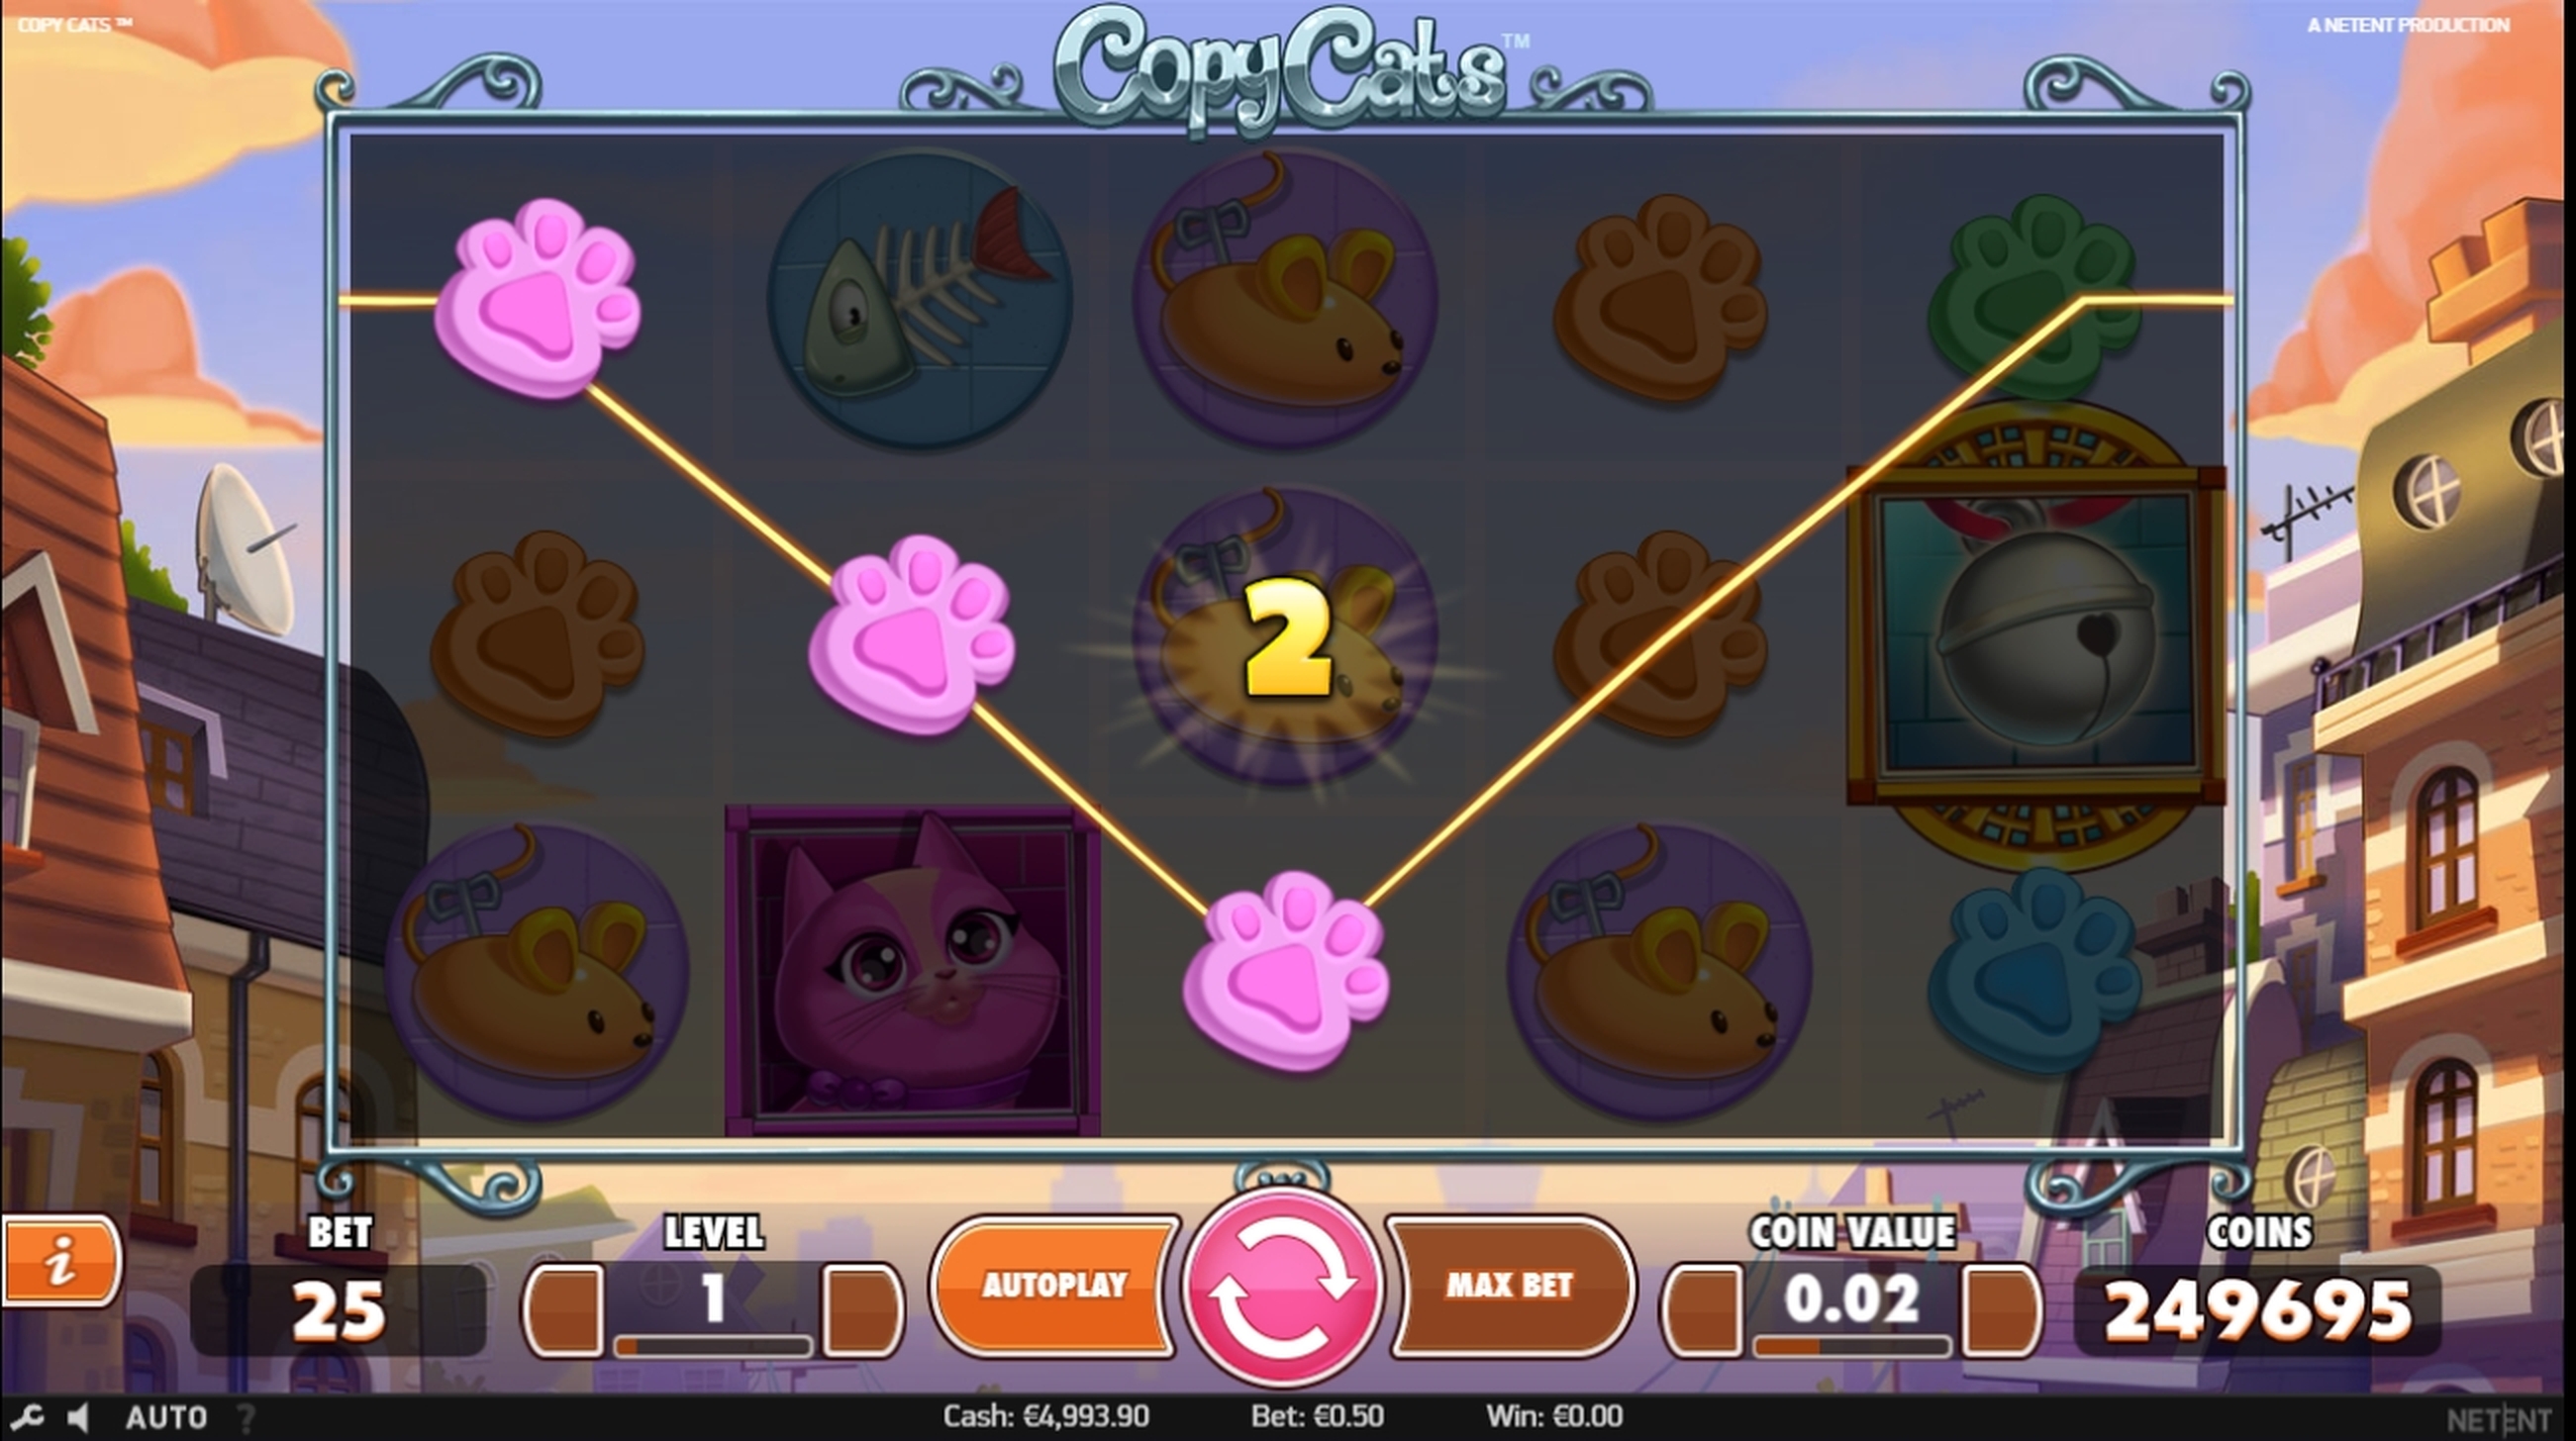 Win Money in Copy Cats Free Slot Game by NetEnt